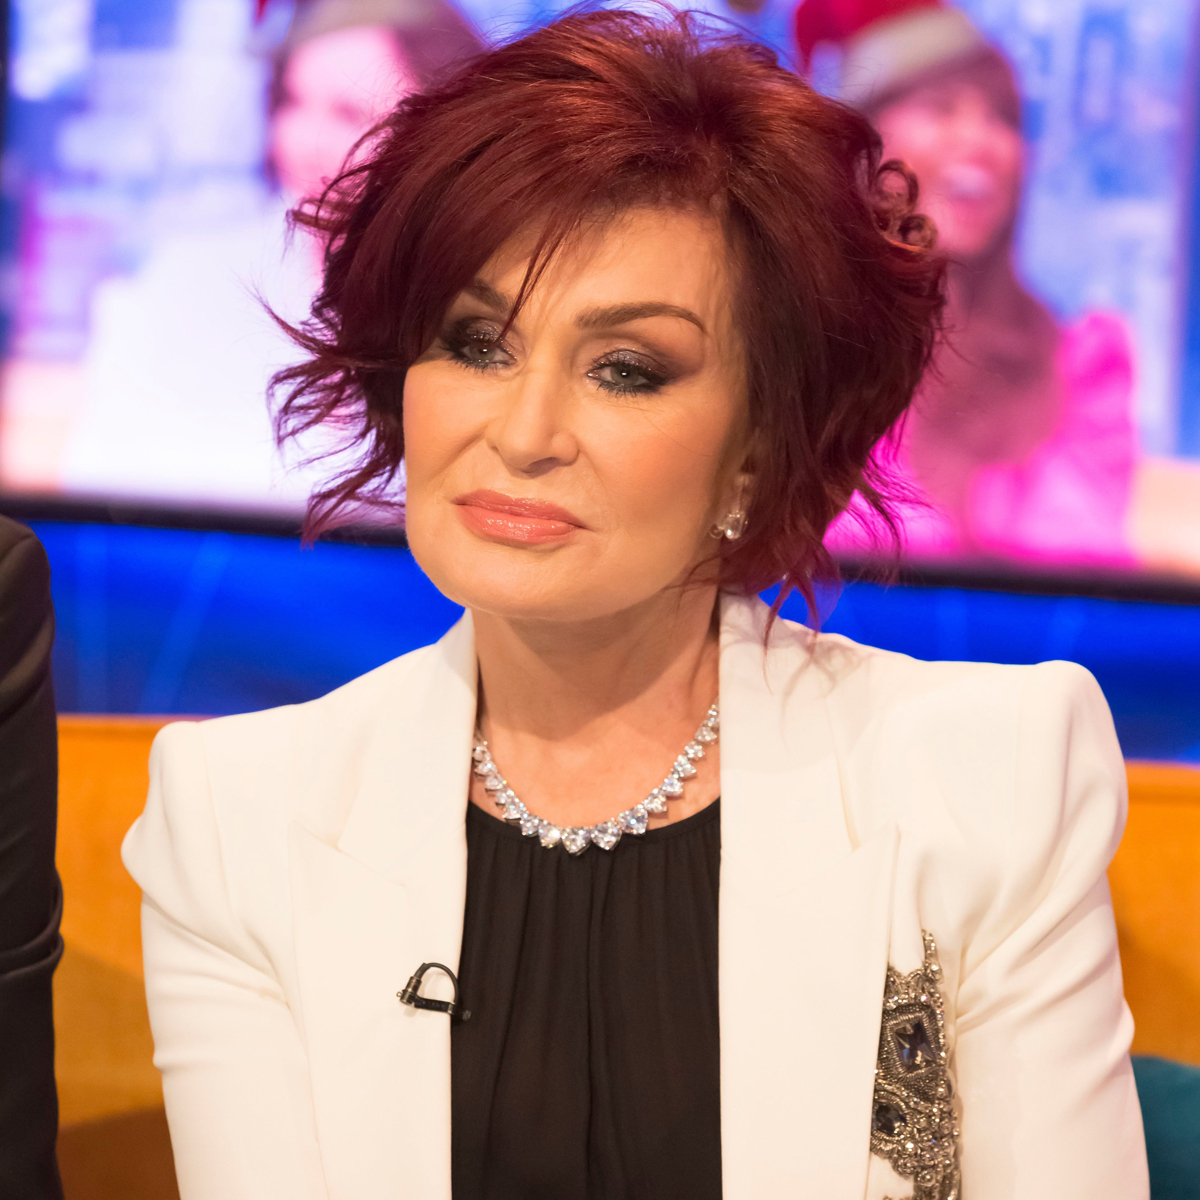 Sharon Osbourne claims CBS ‘blinded’ her on Piers Morgan talk